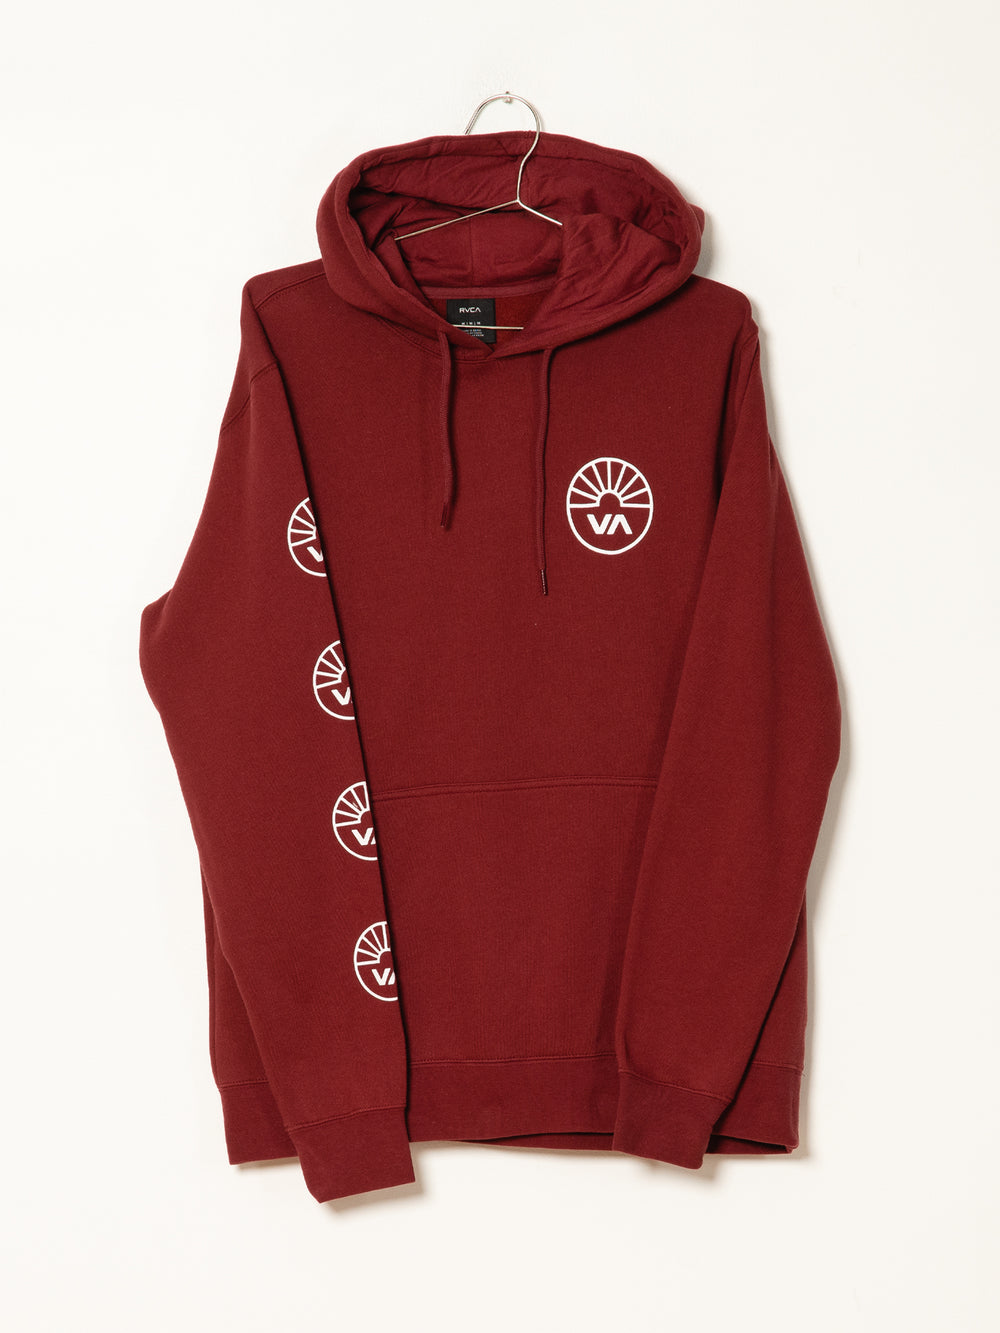 RVCA PROGRESS PULL OVER HOODIE - CLEARANCE